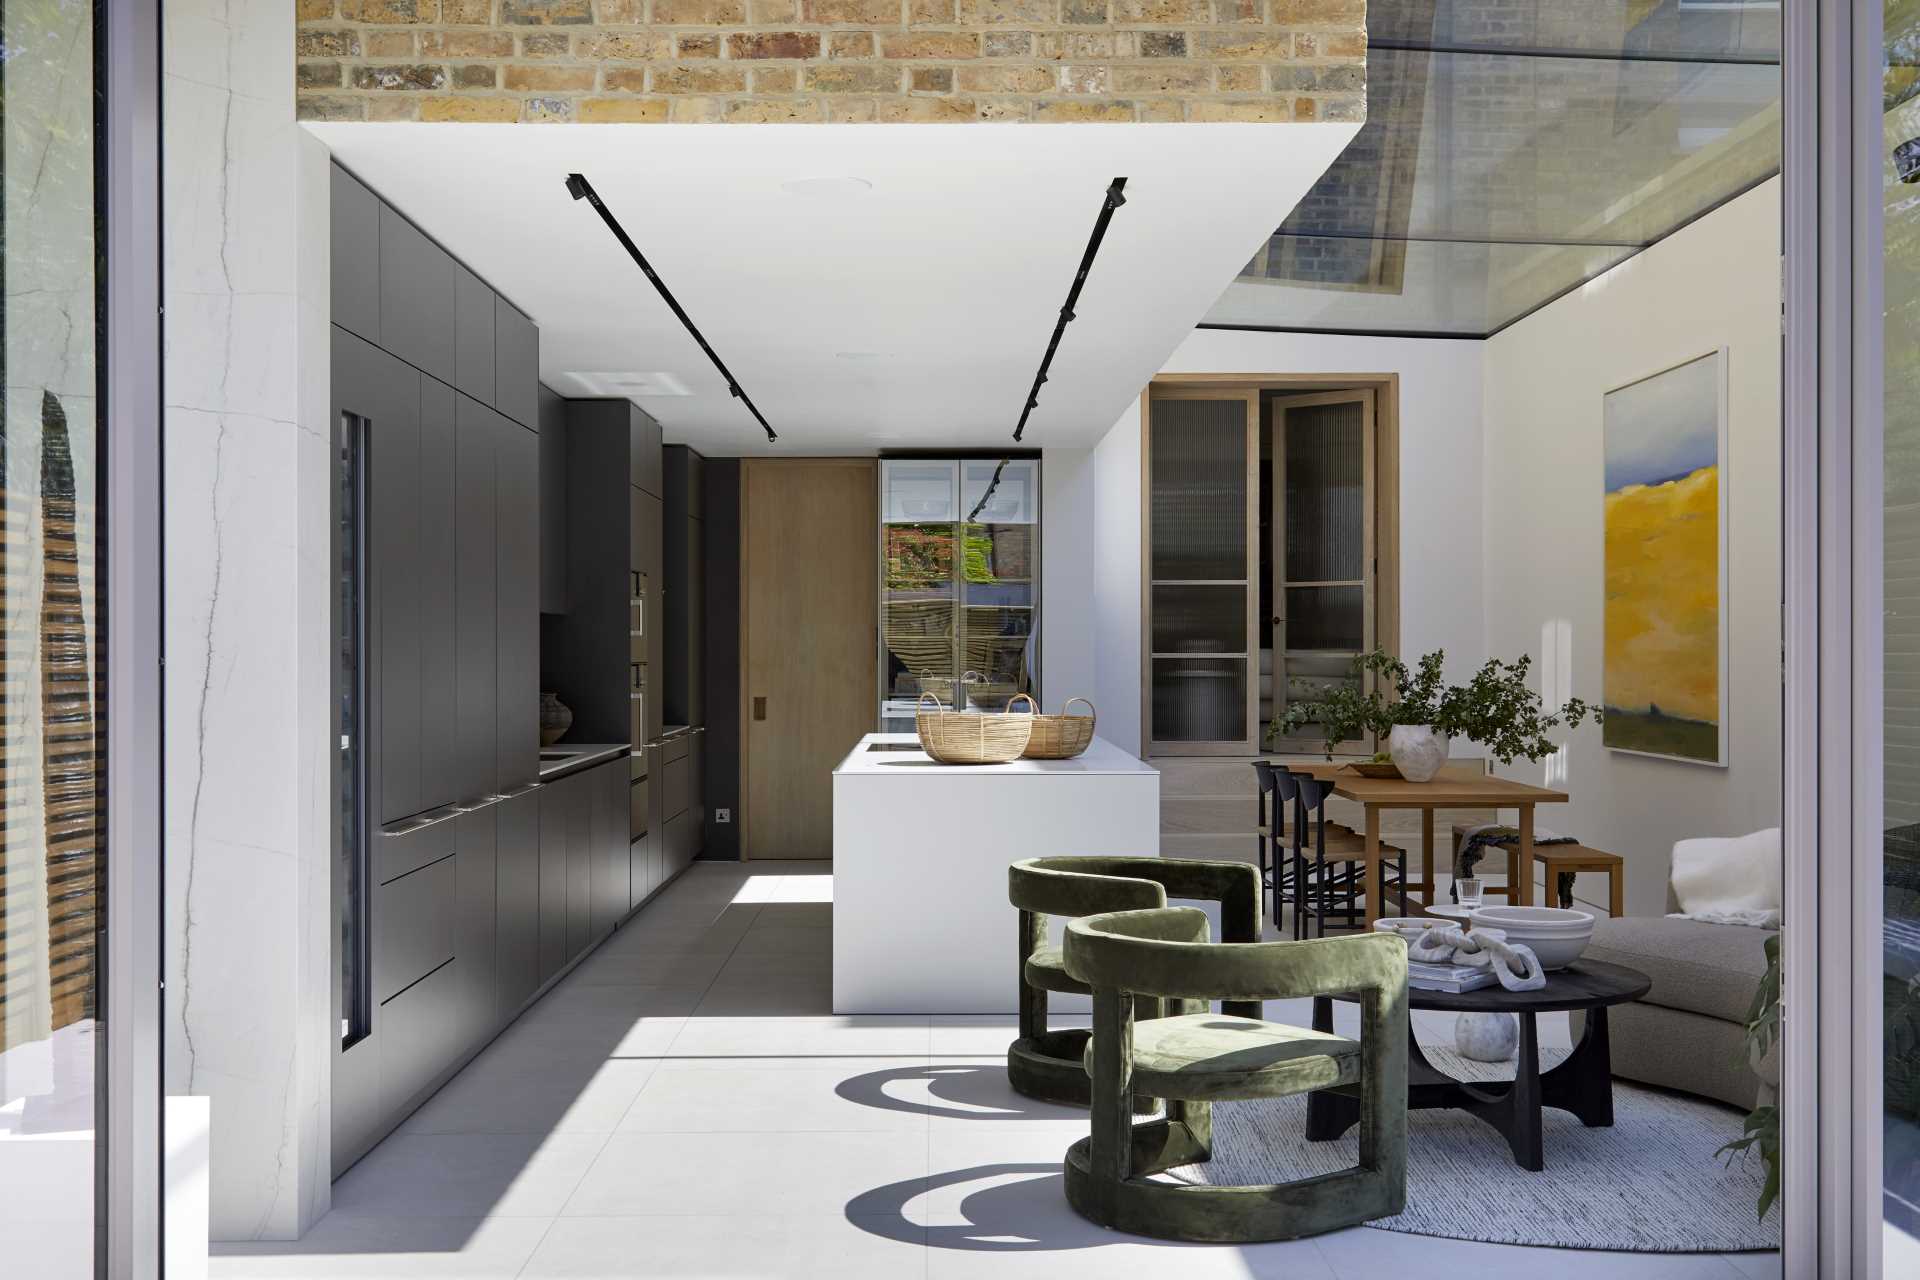 A modern extension with a large skylight that adds natural light to the kitchen, dining area, and living room.